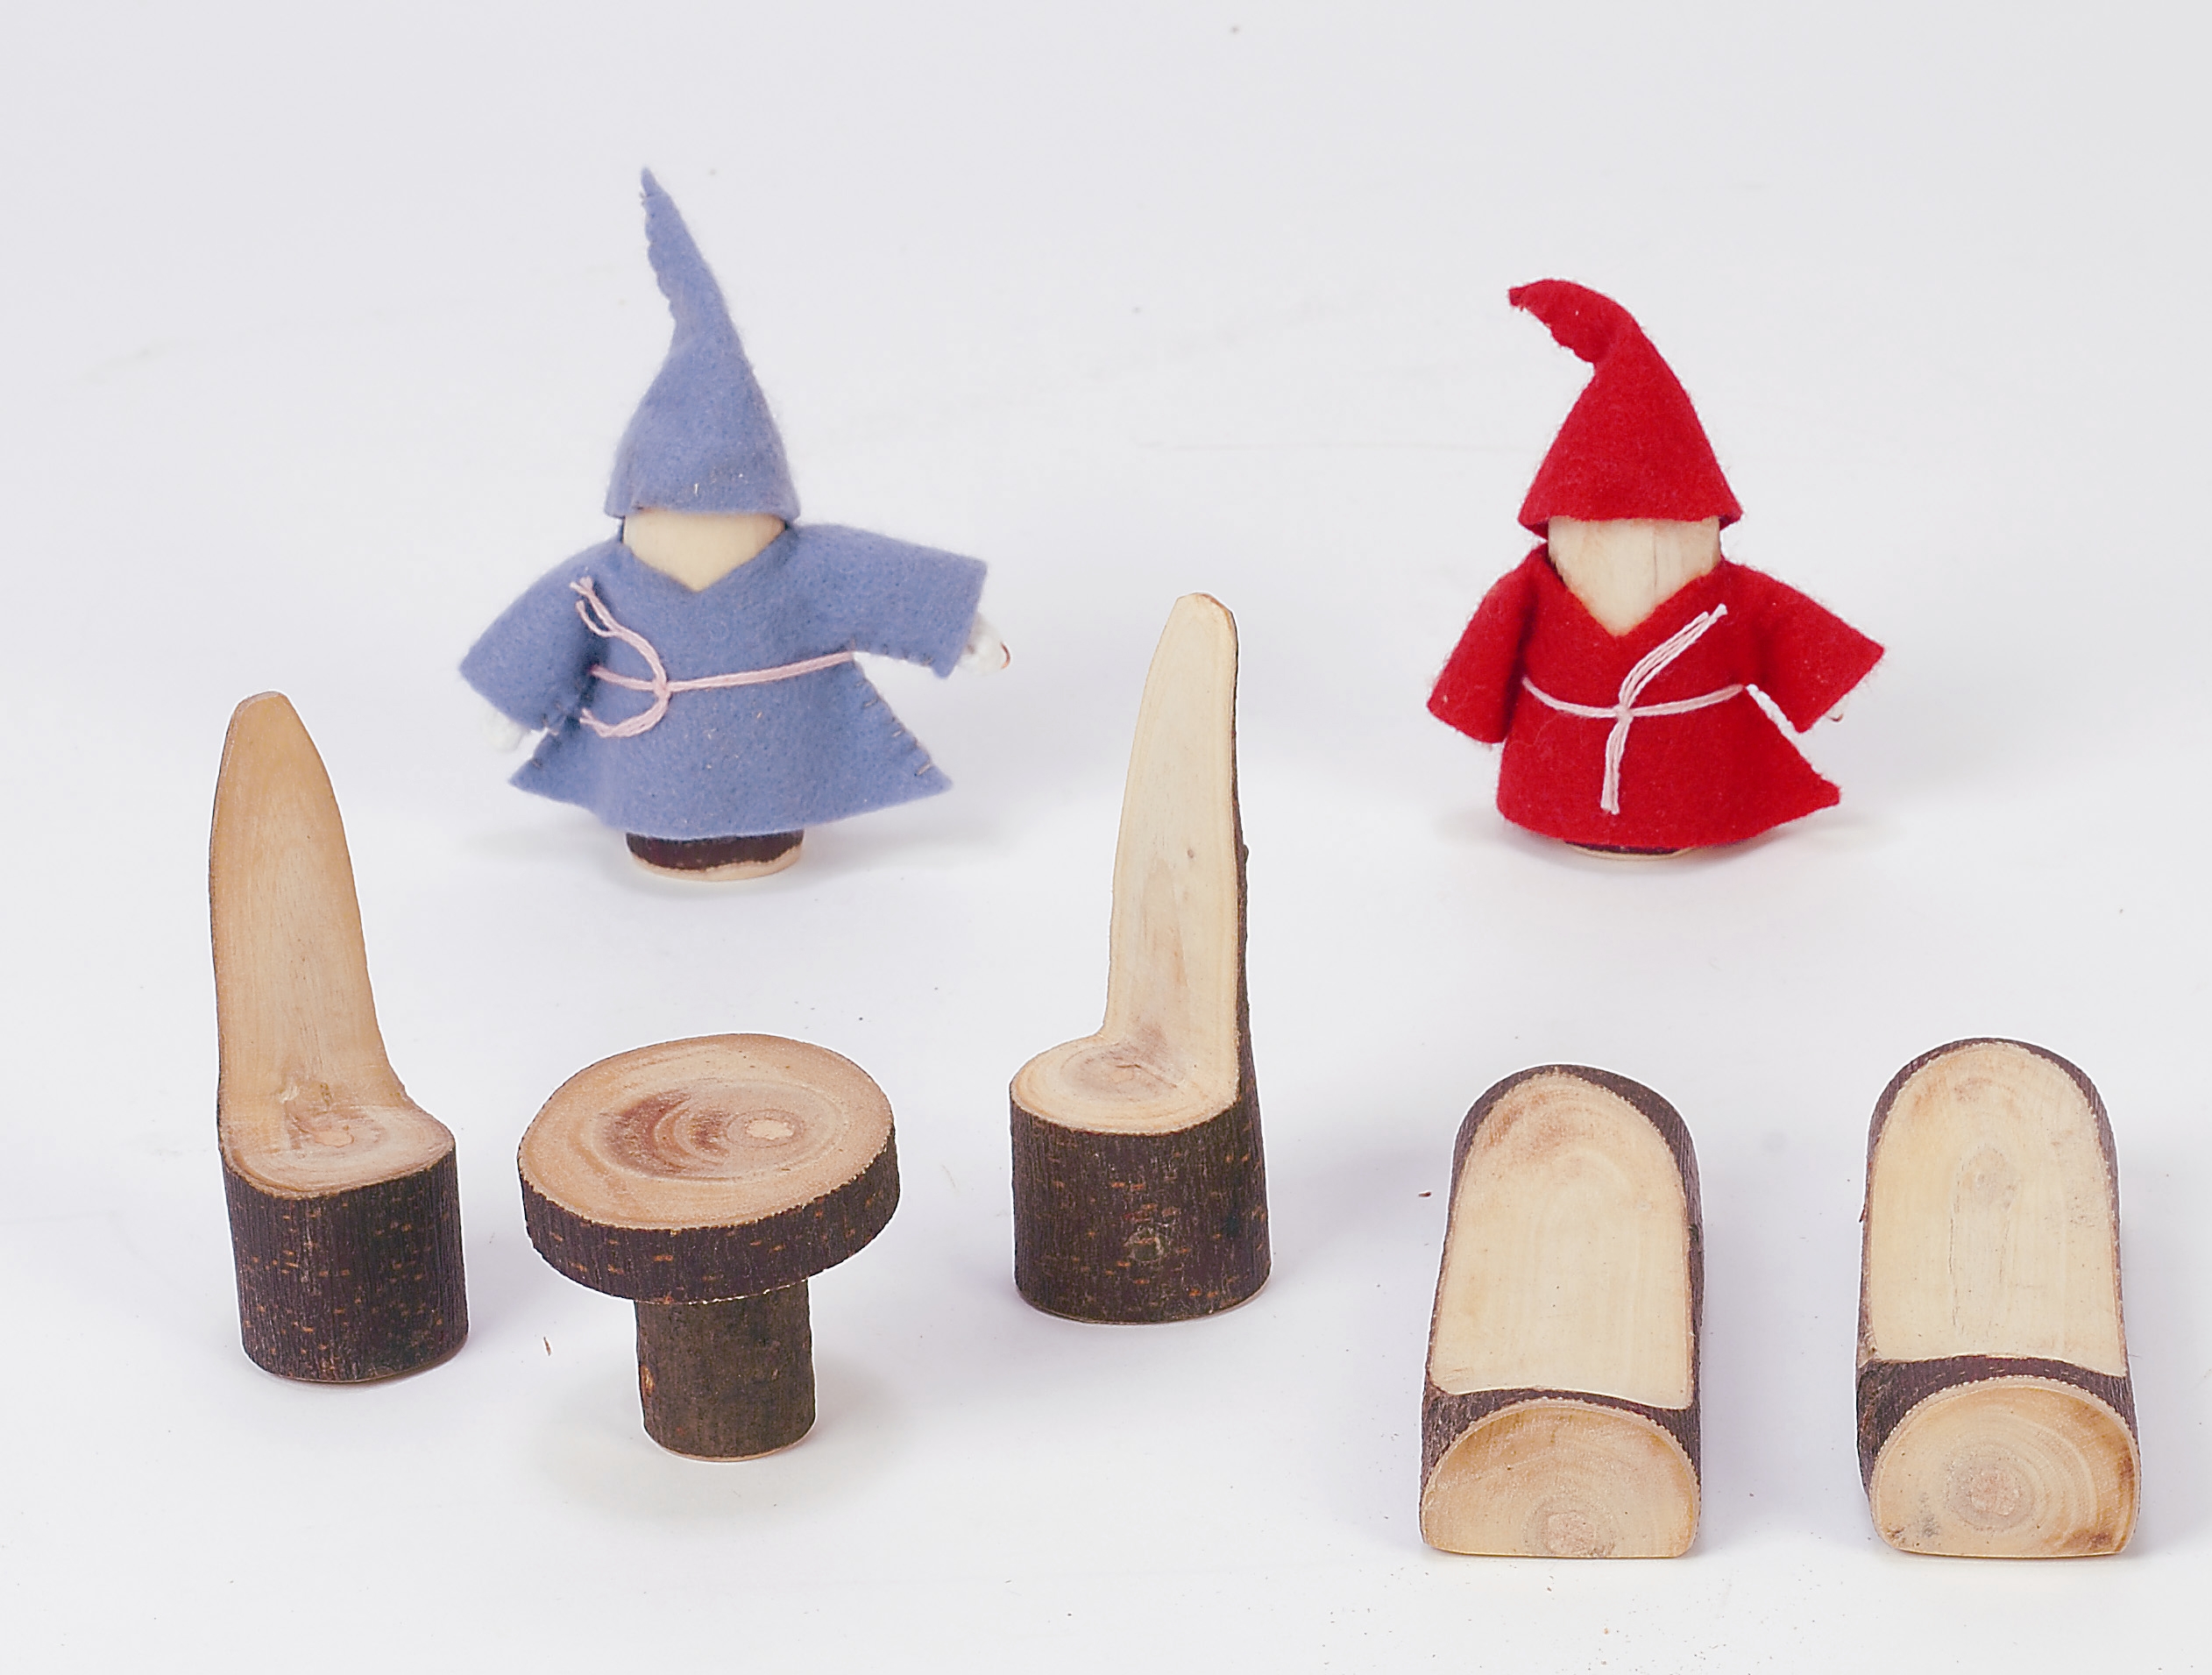 Tree blocks dolls and assorted furniture are a sustainable, eco friendly toy made of natural wood.